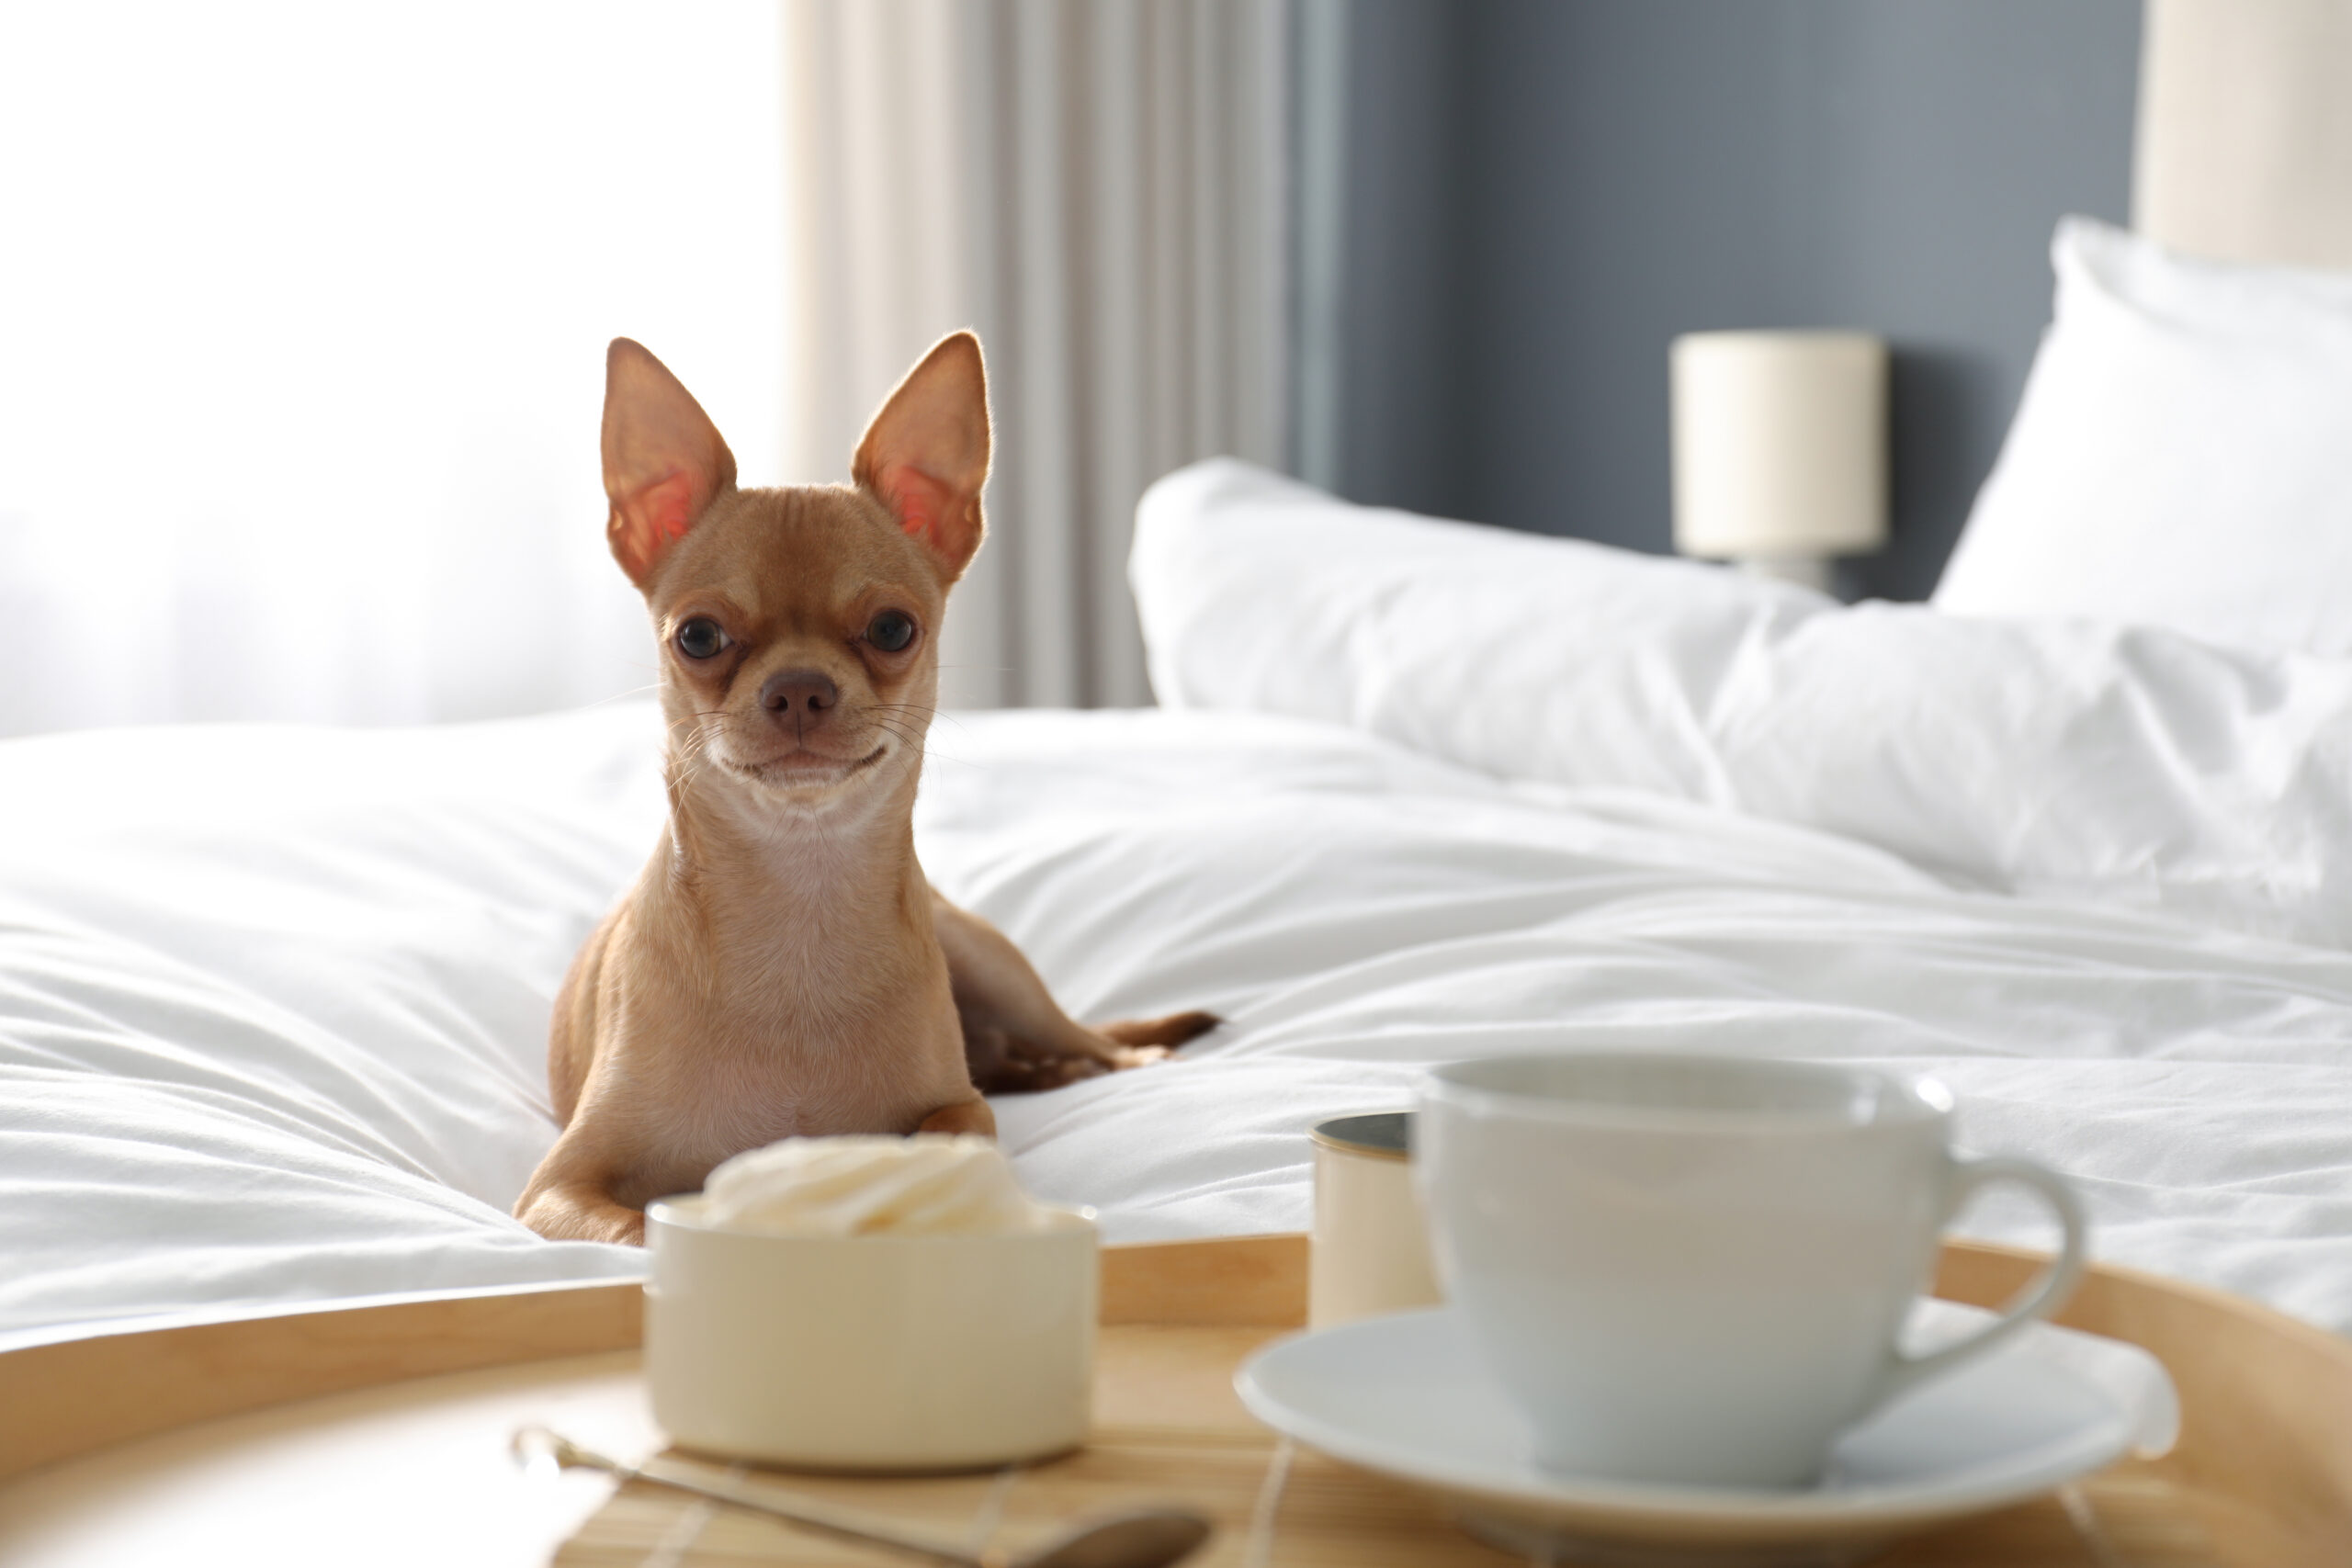 A tan chihuahua on a bed with a coffee and cake